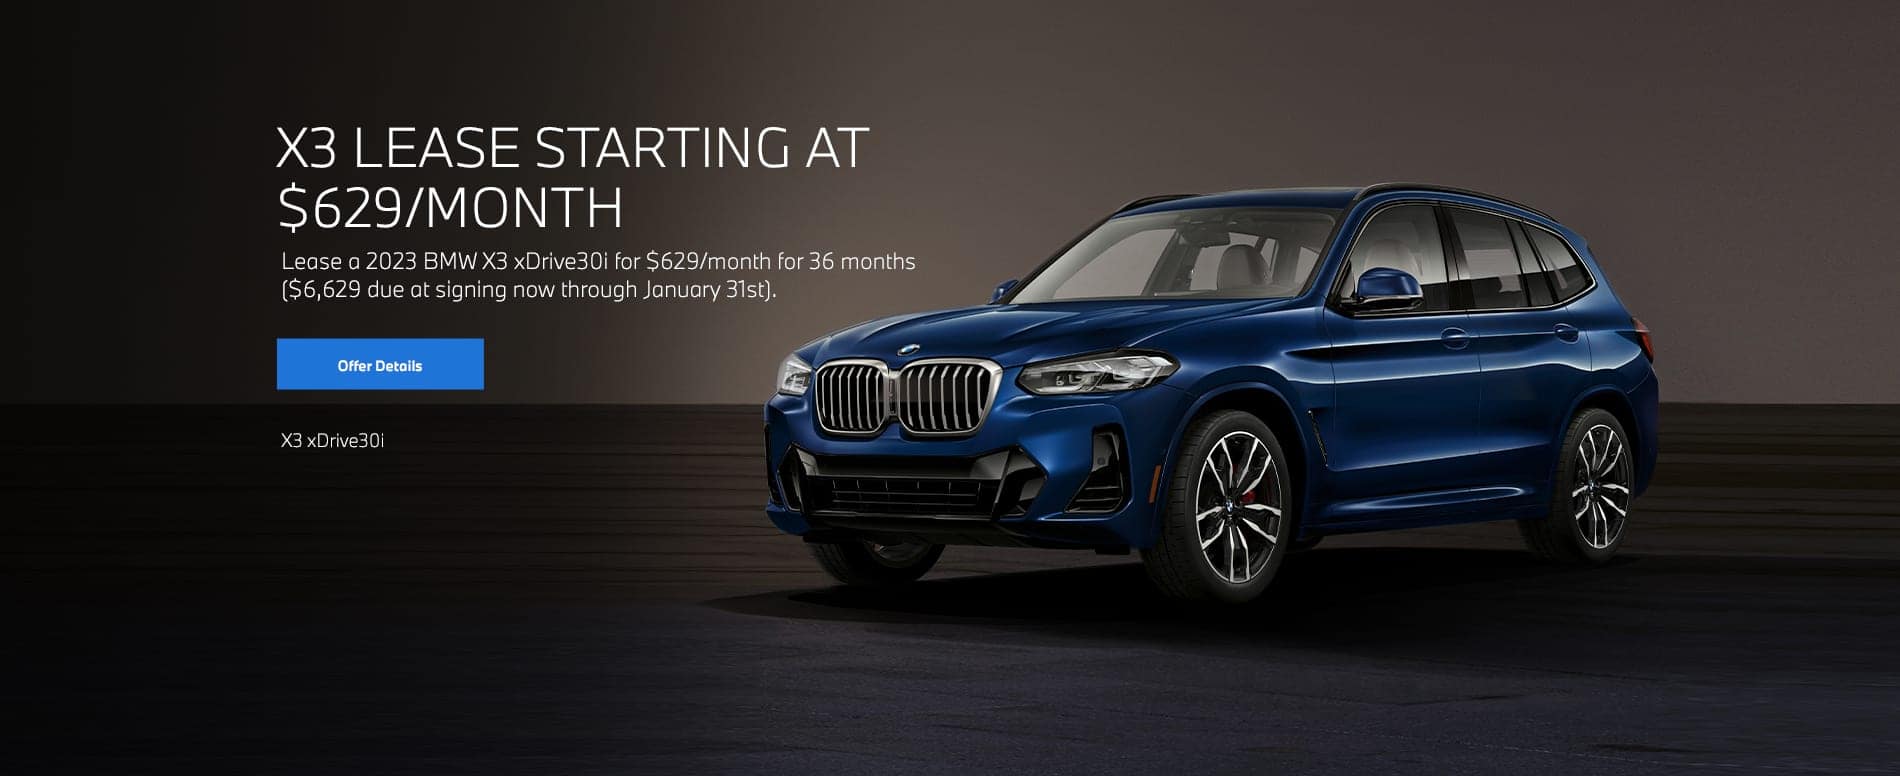 2023 X3 lease starting at $629 per month for 36 months